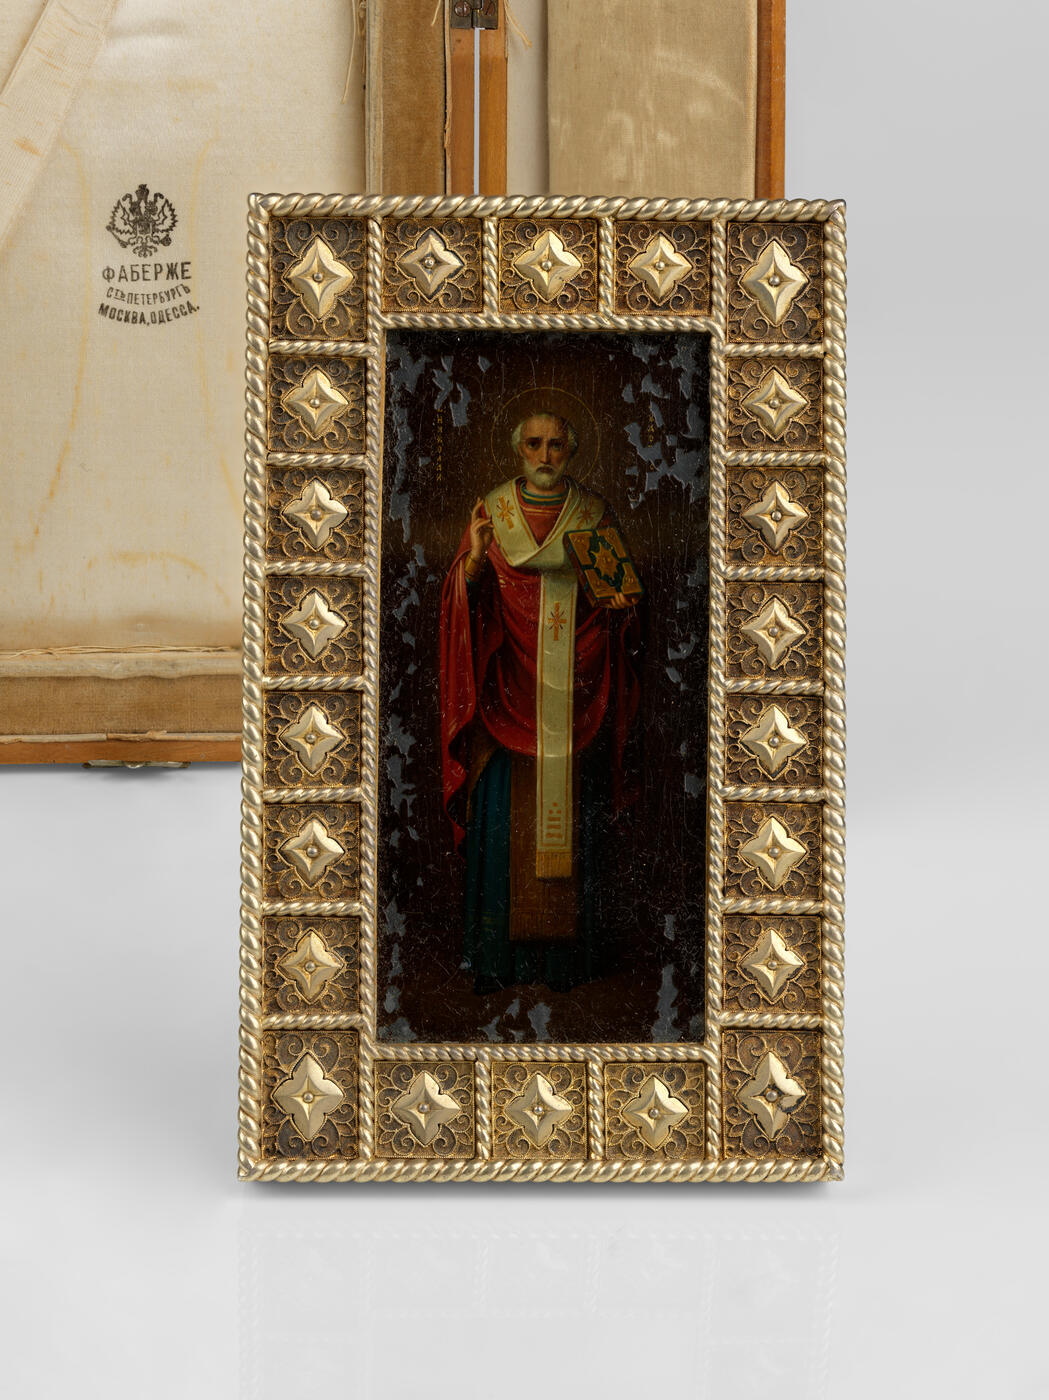 A Fabergé Icon of St Nicholas in Silver Frame with Original Wooden Case